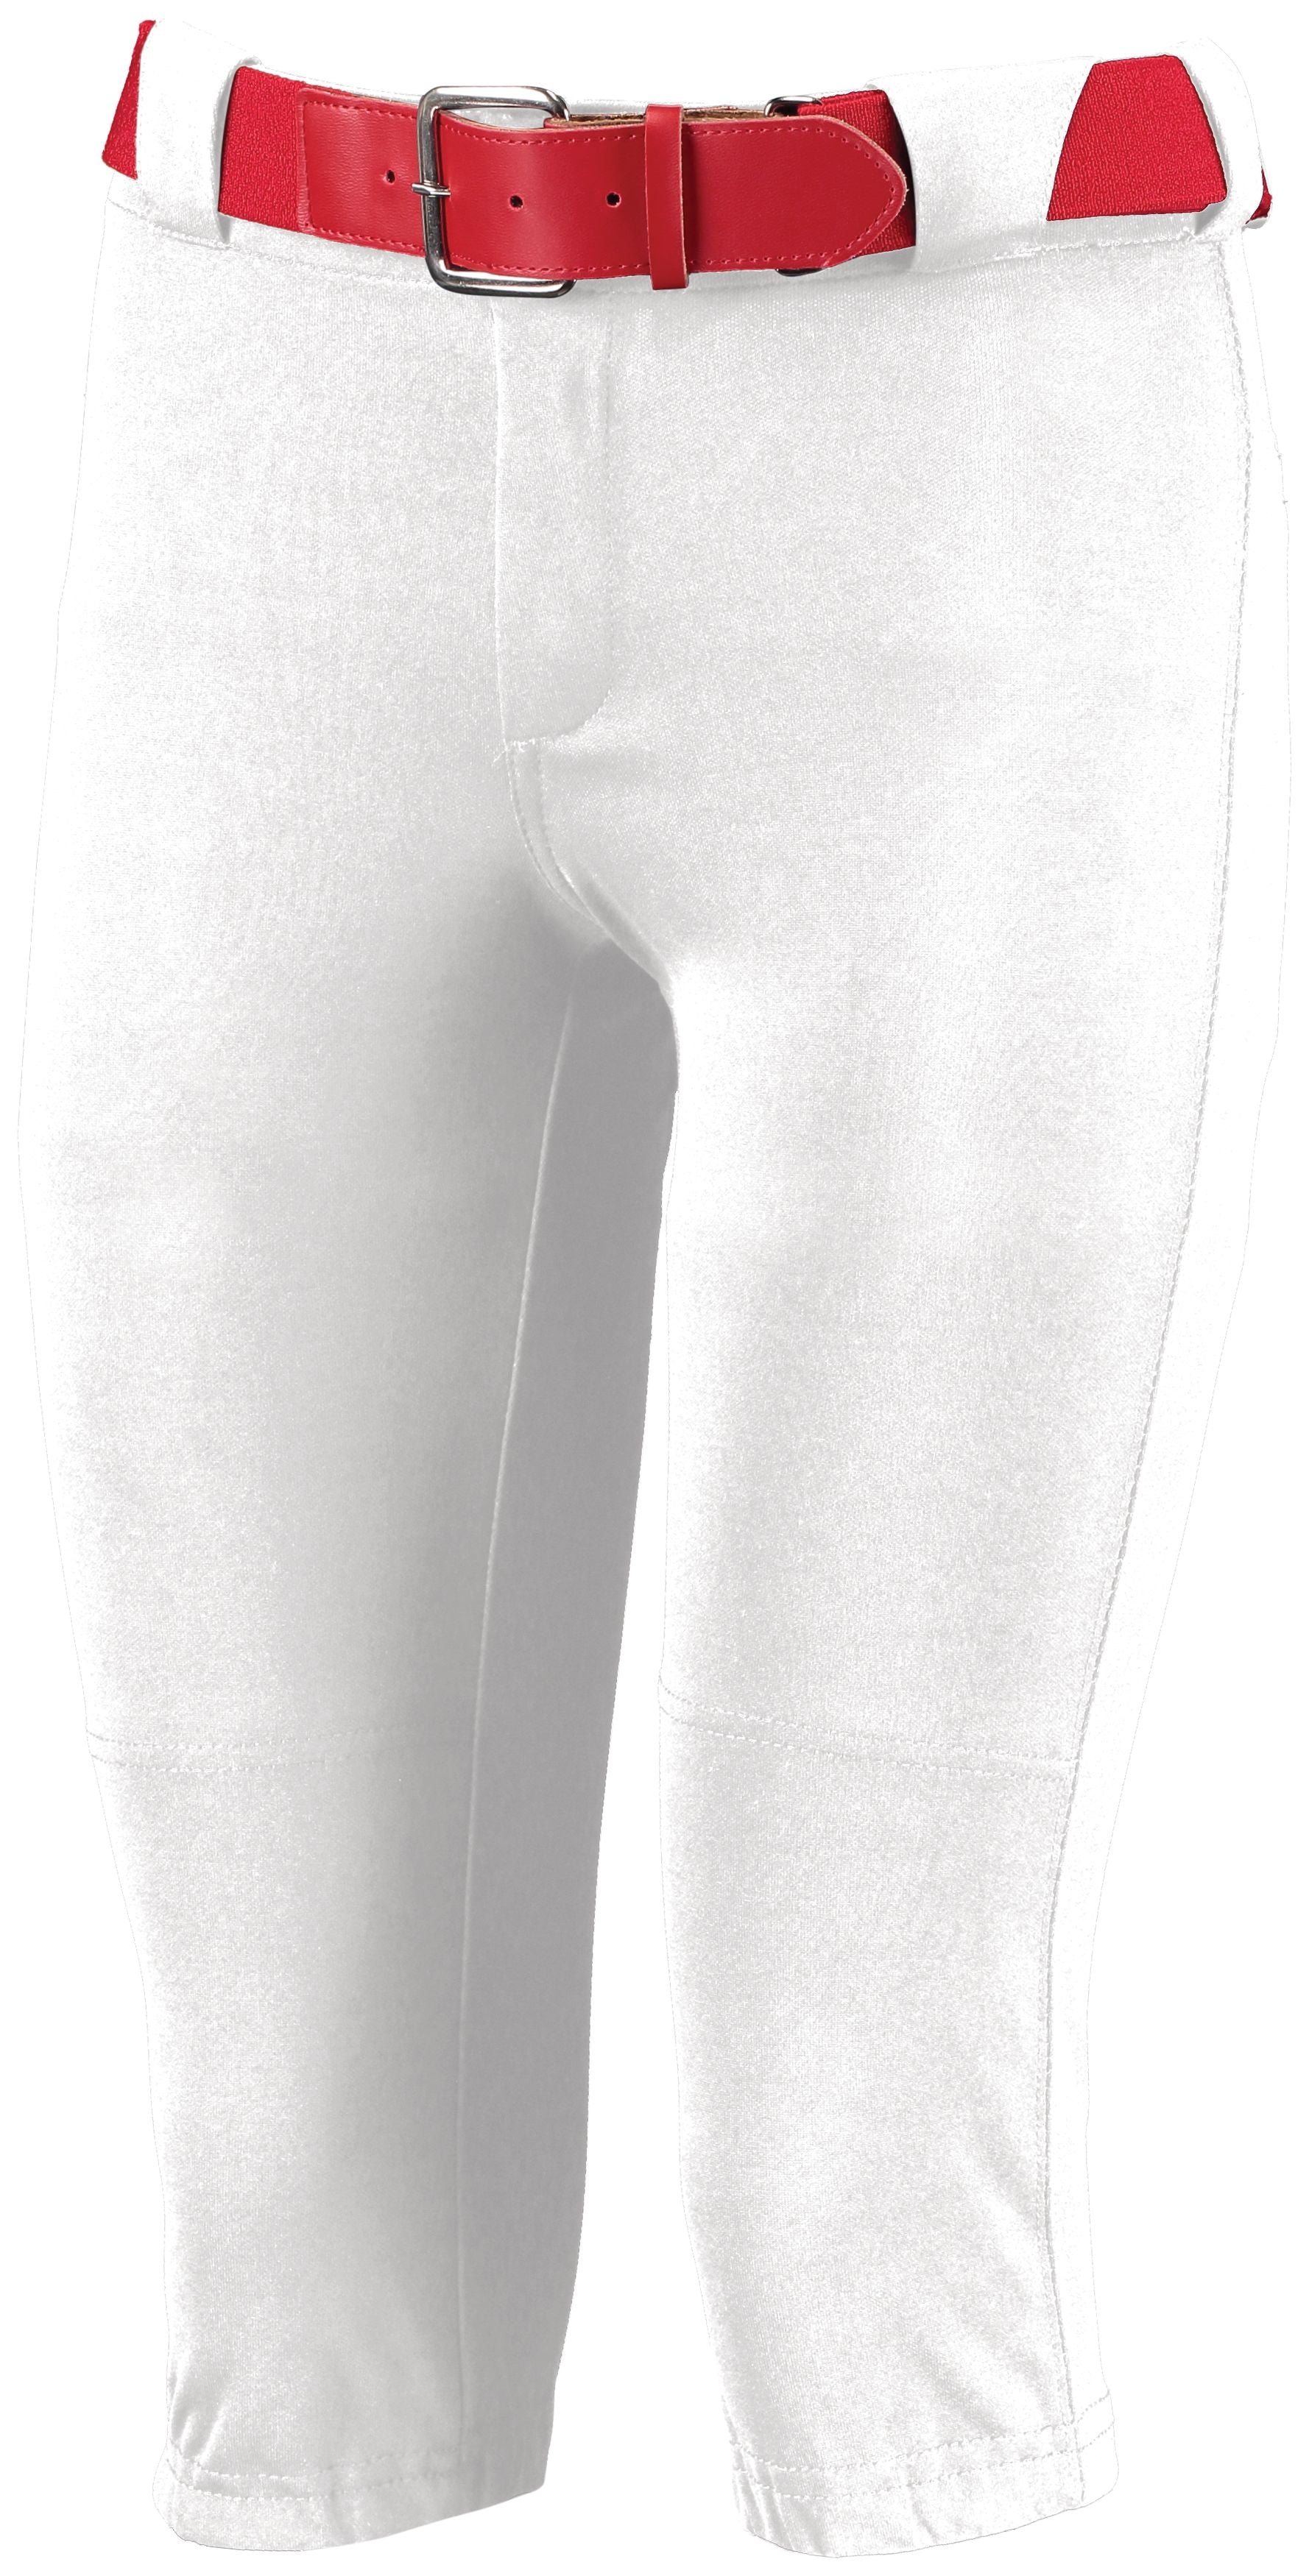 Russell Athletic Ladies Low Rise Knicker Length Pant in White  -Part of the Ladies, Softball, Russell-Athletic-Products product lines at KanaleyCreations.com